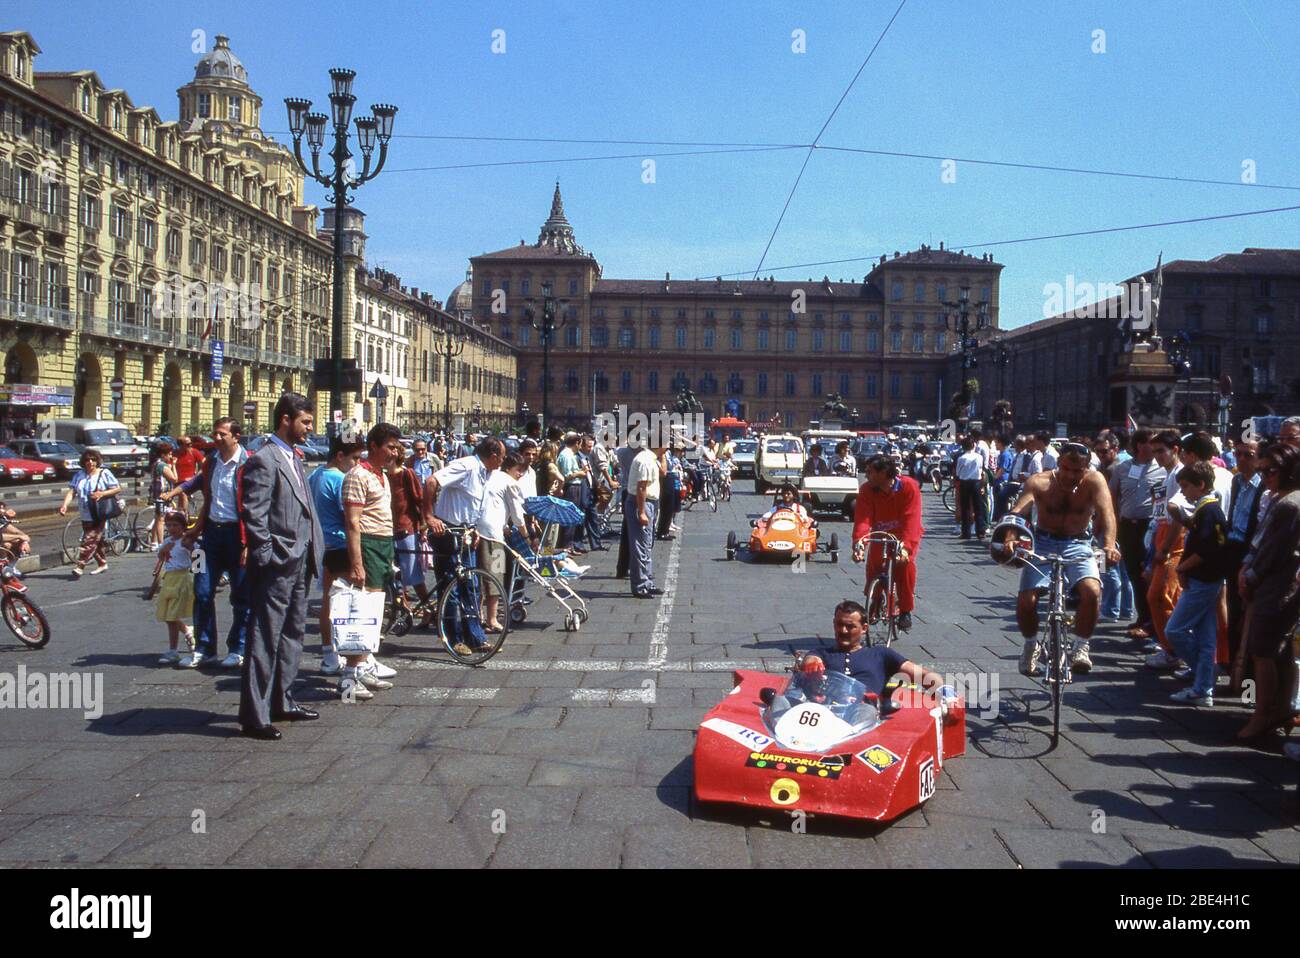 Turin, Italy - July 1988: First italian parade of ecological cars. They are pedal cars or models equipped with solar collector. Stock Photo